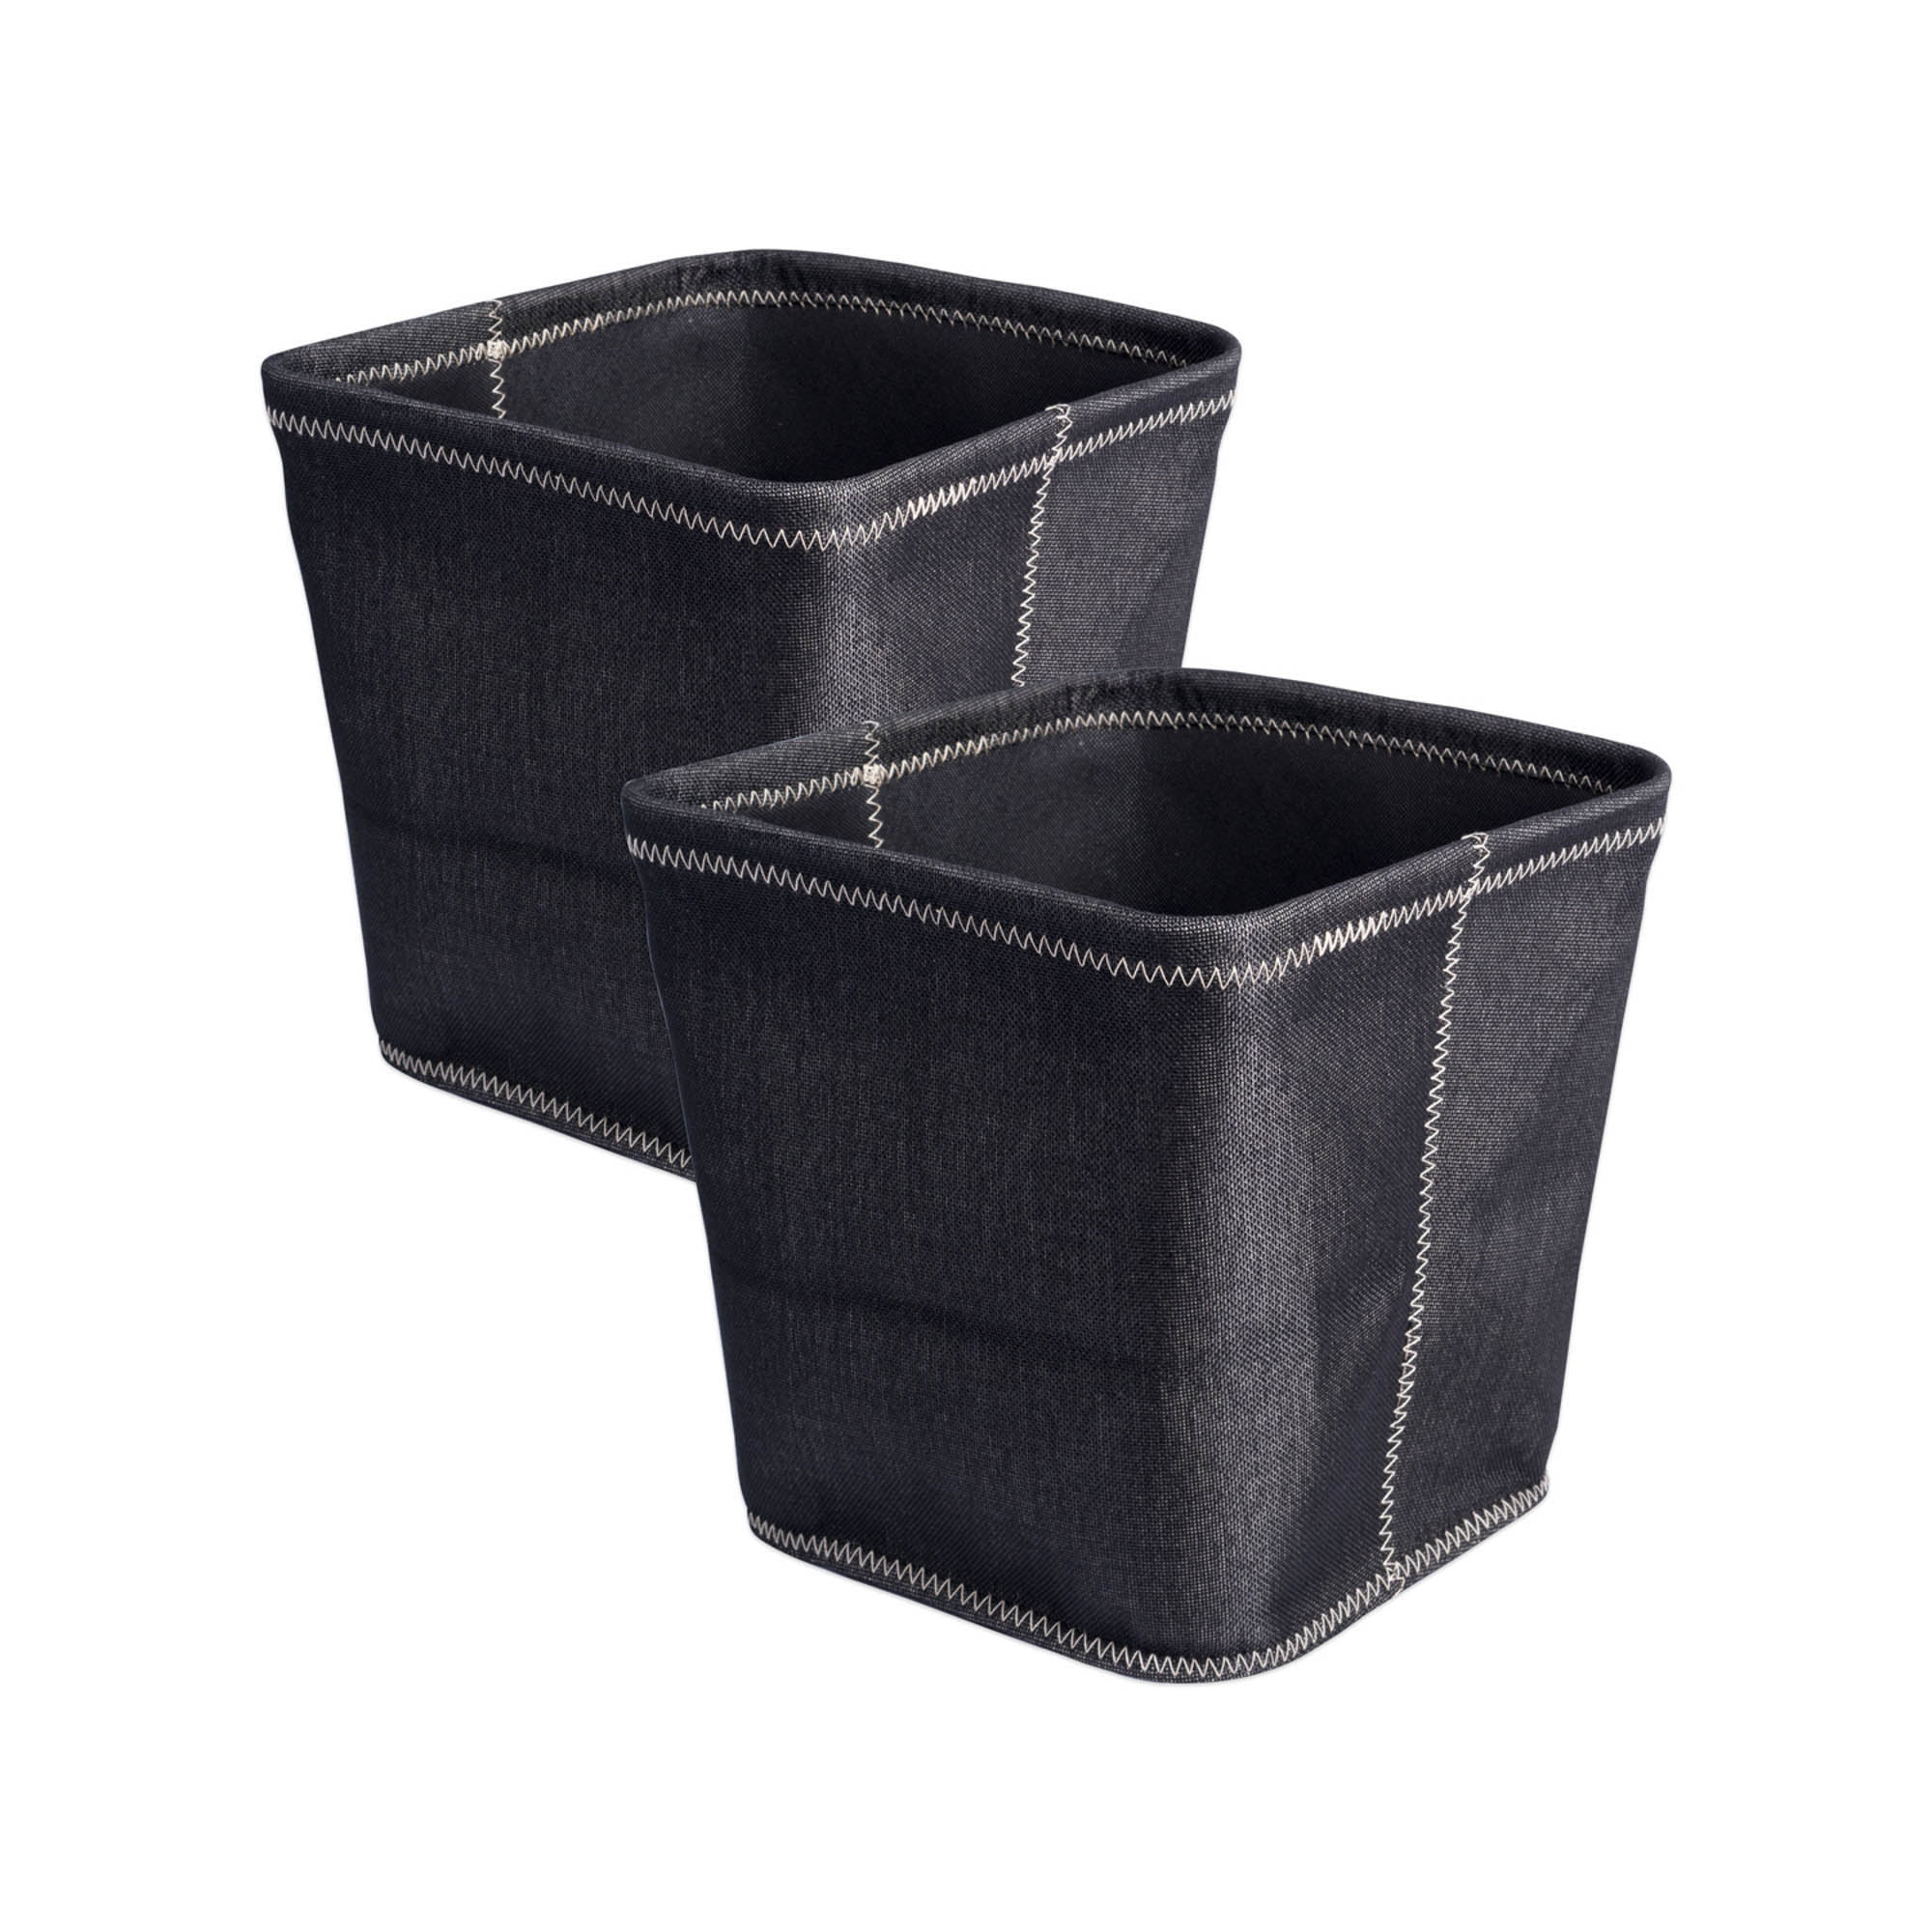 Details about   Decorative Basket Fabric Storage Bin Home Organizer with Rope Handles Toy Box 